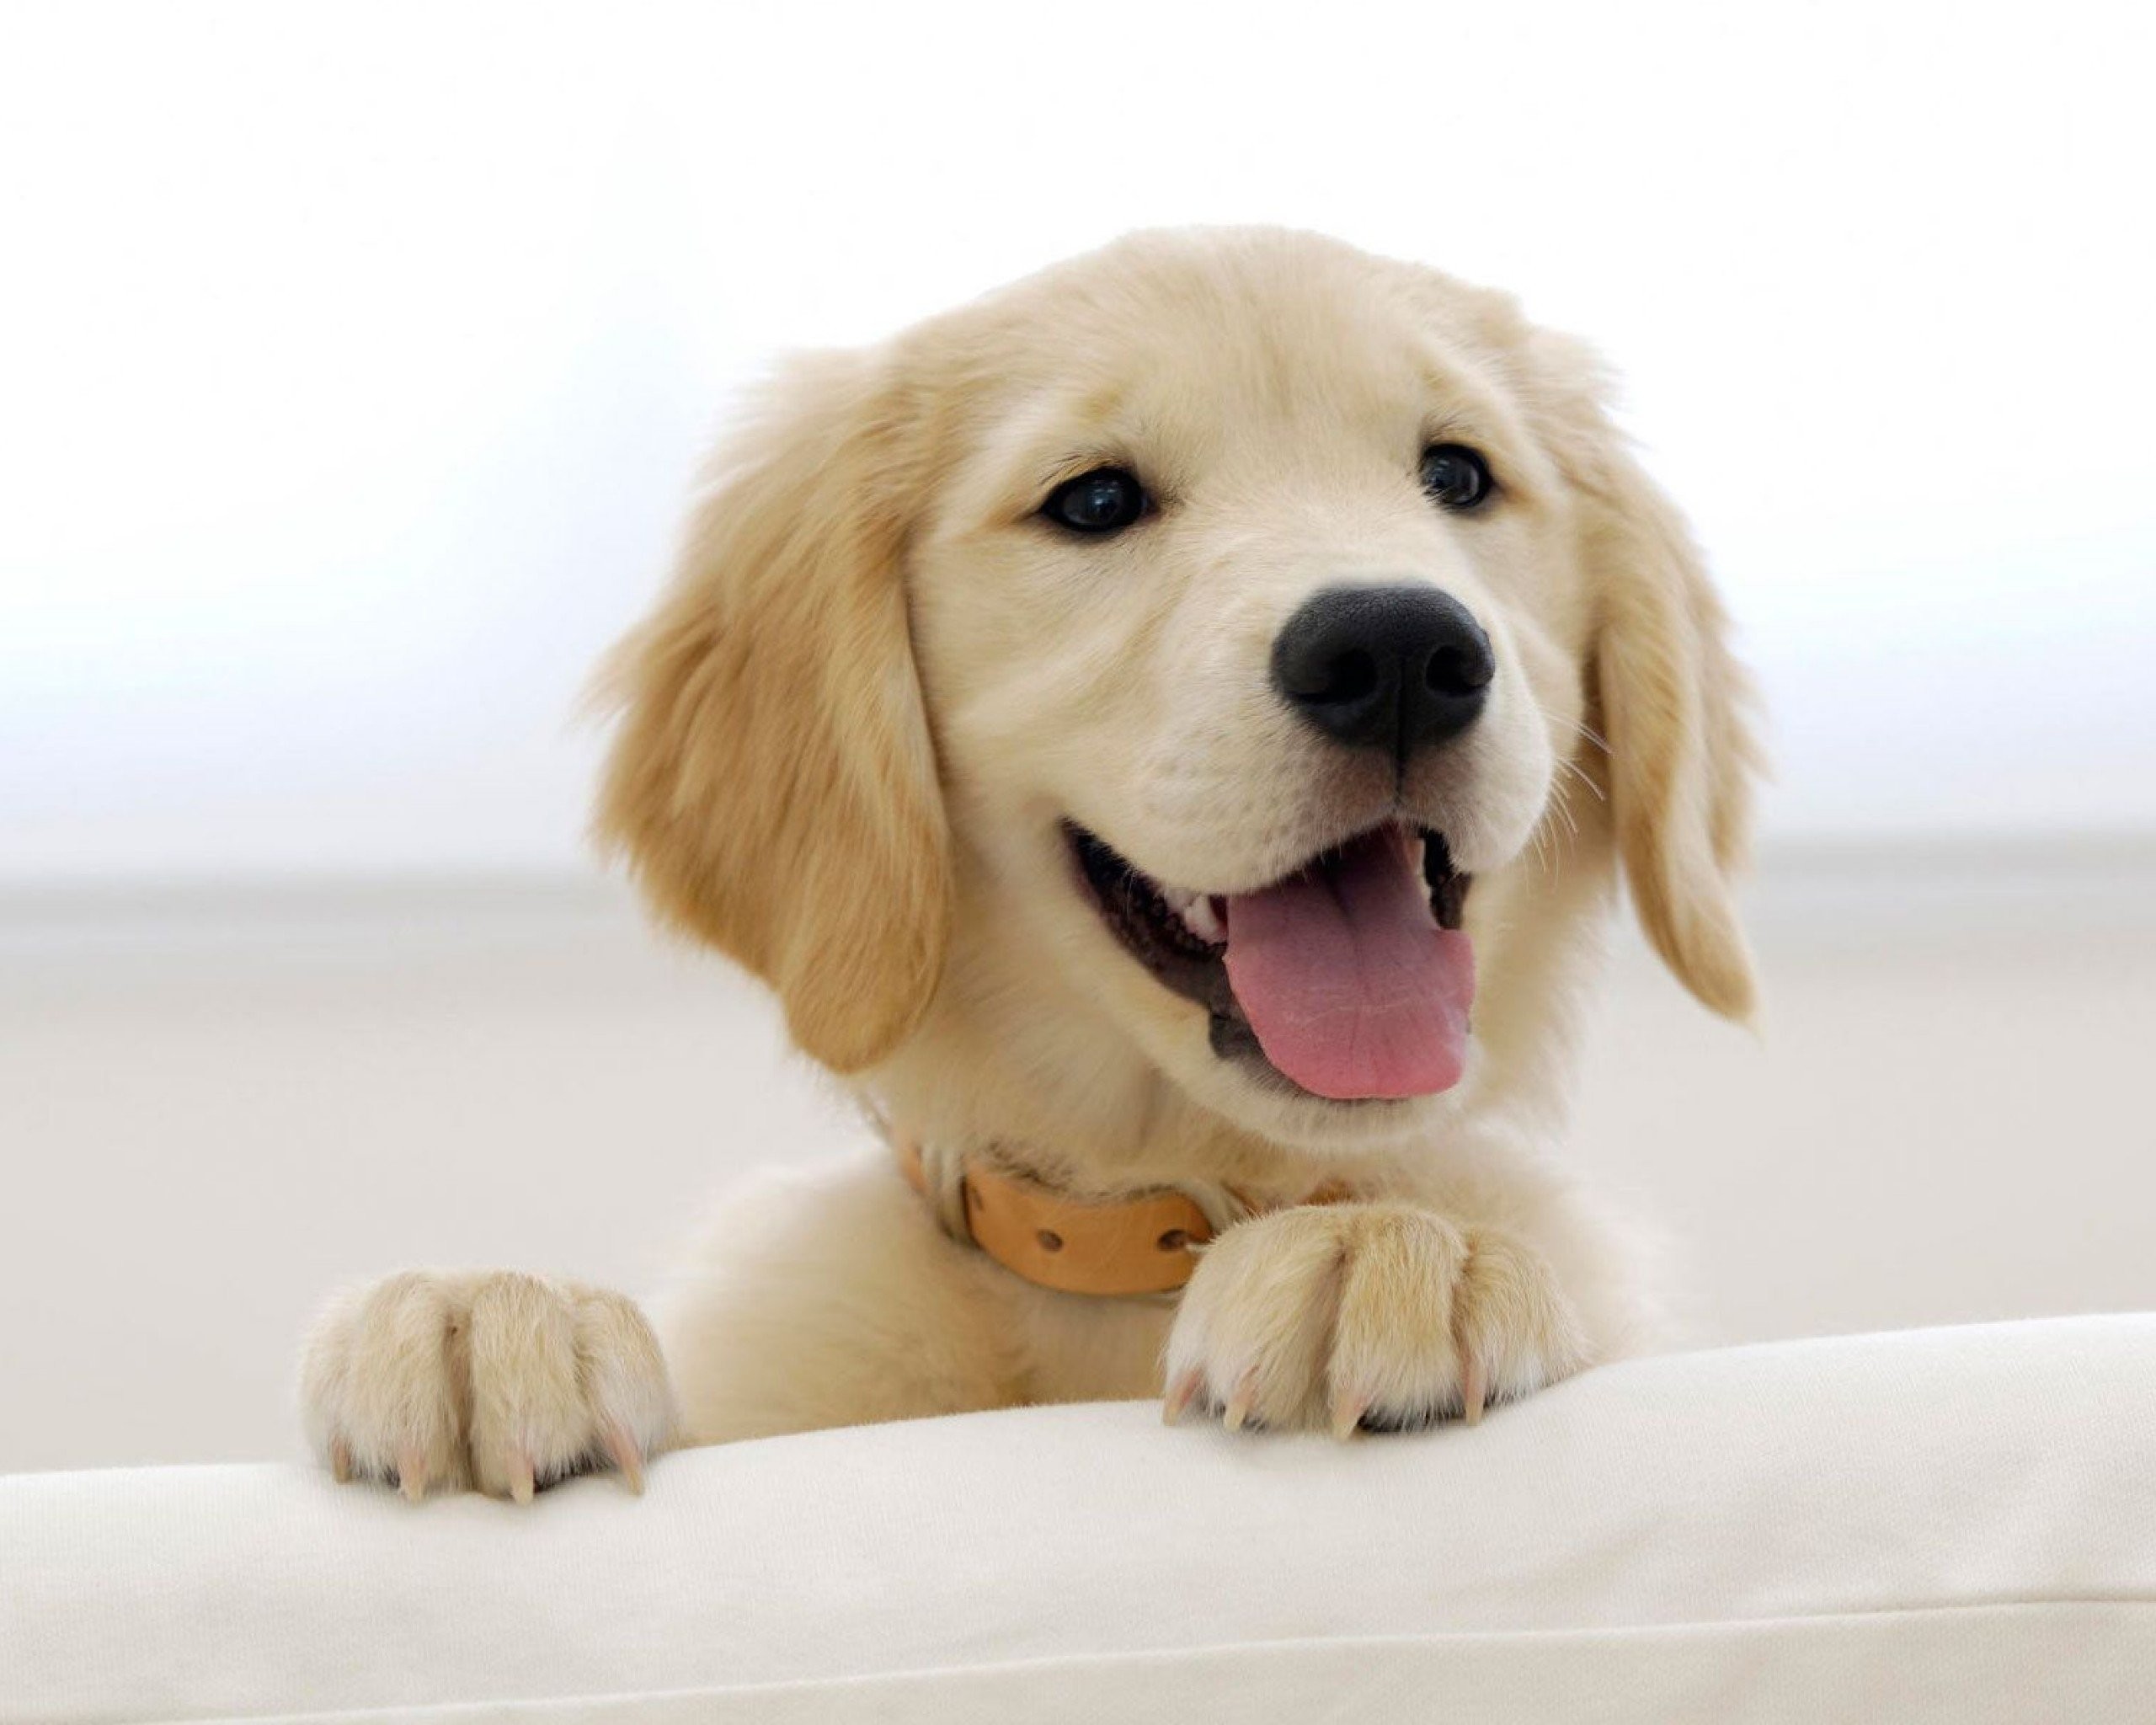 2560x2048 Puppies puppy baby dog dogs (44) wallpaper |  | 364380 |  WallpaperUP